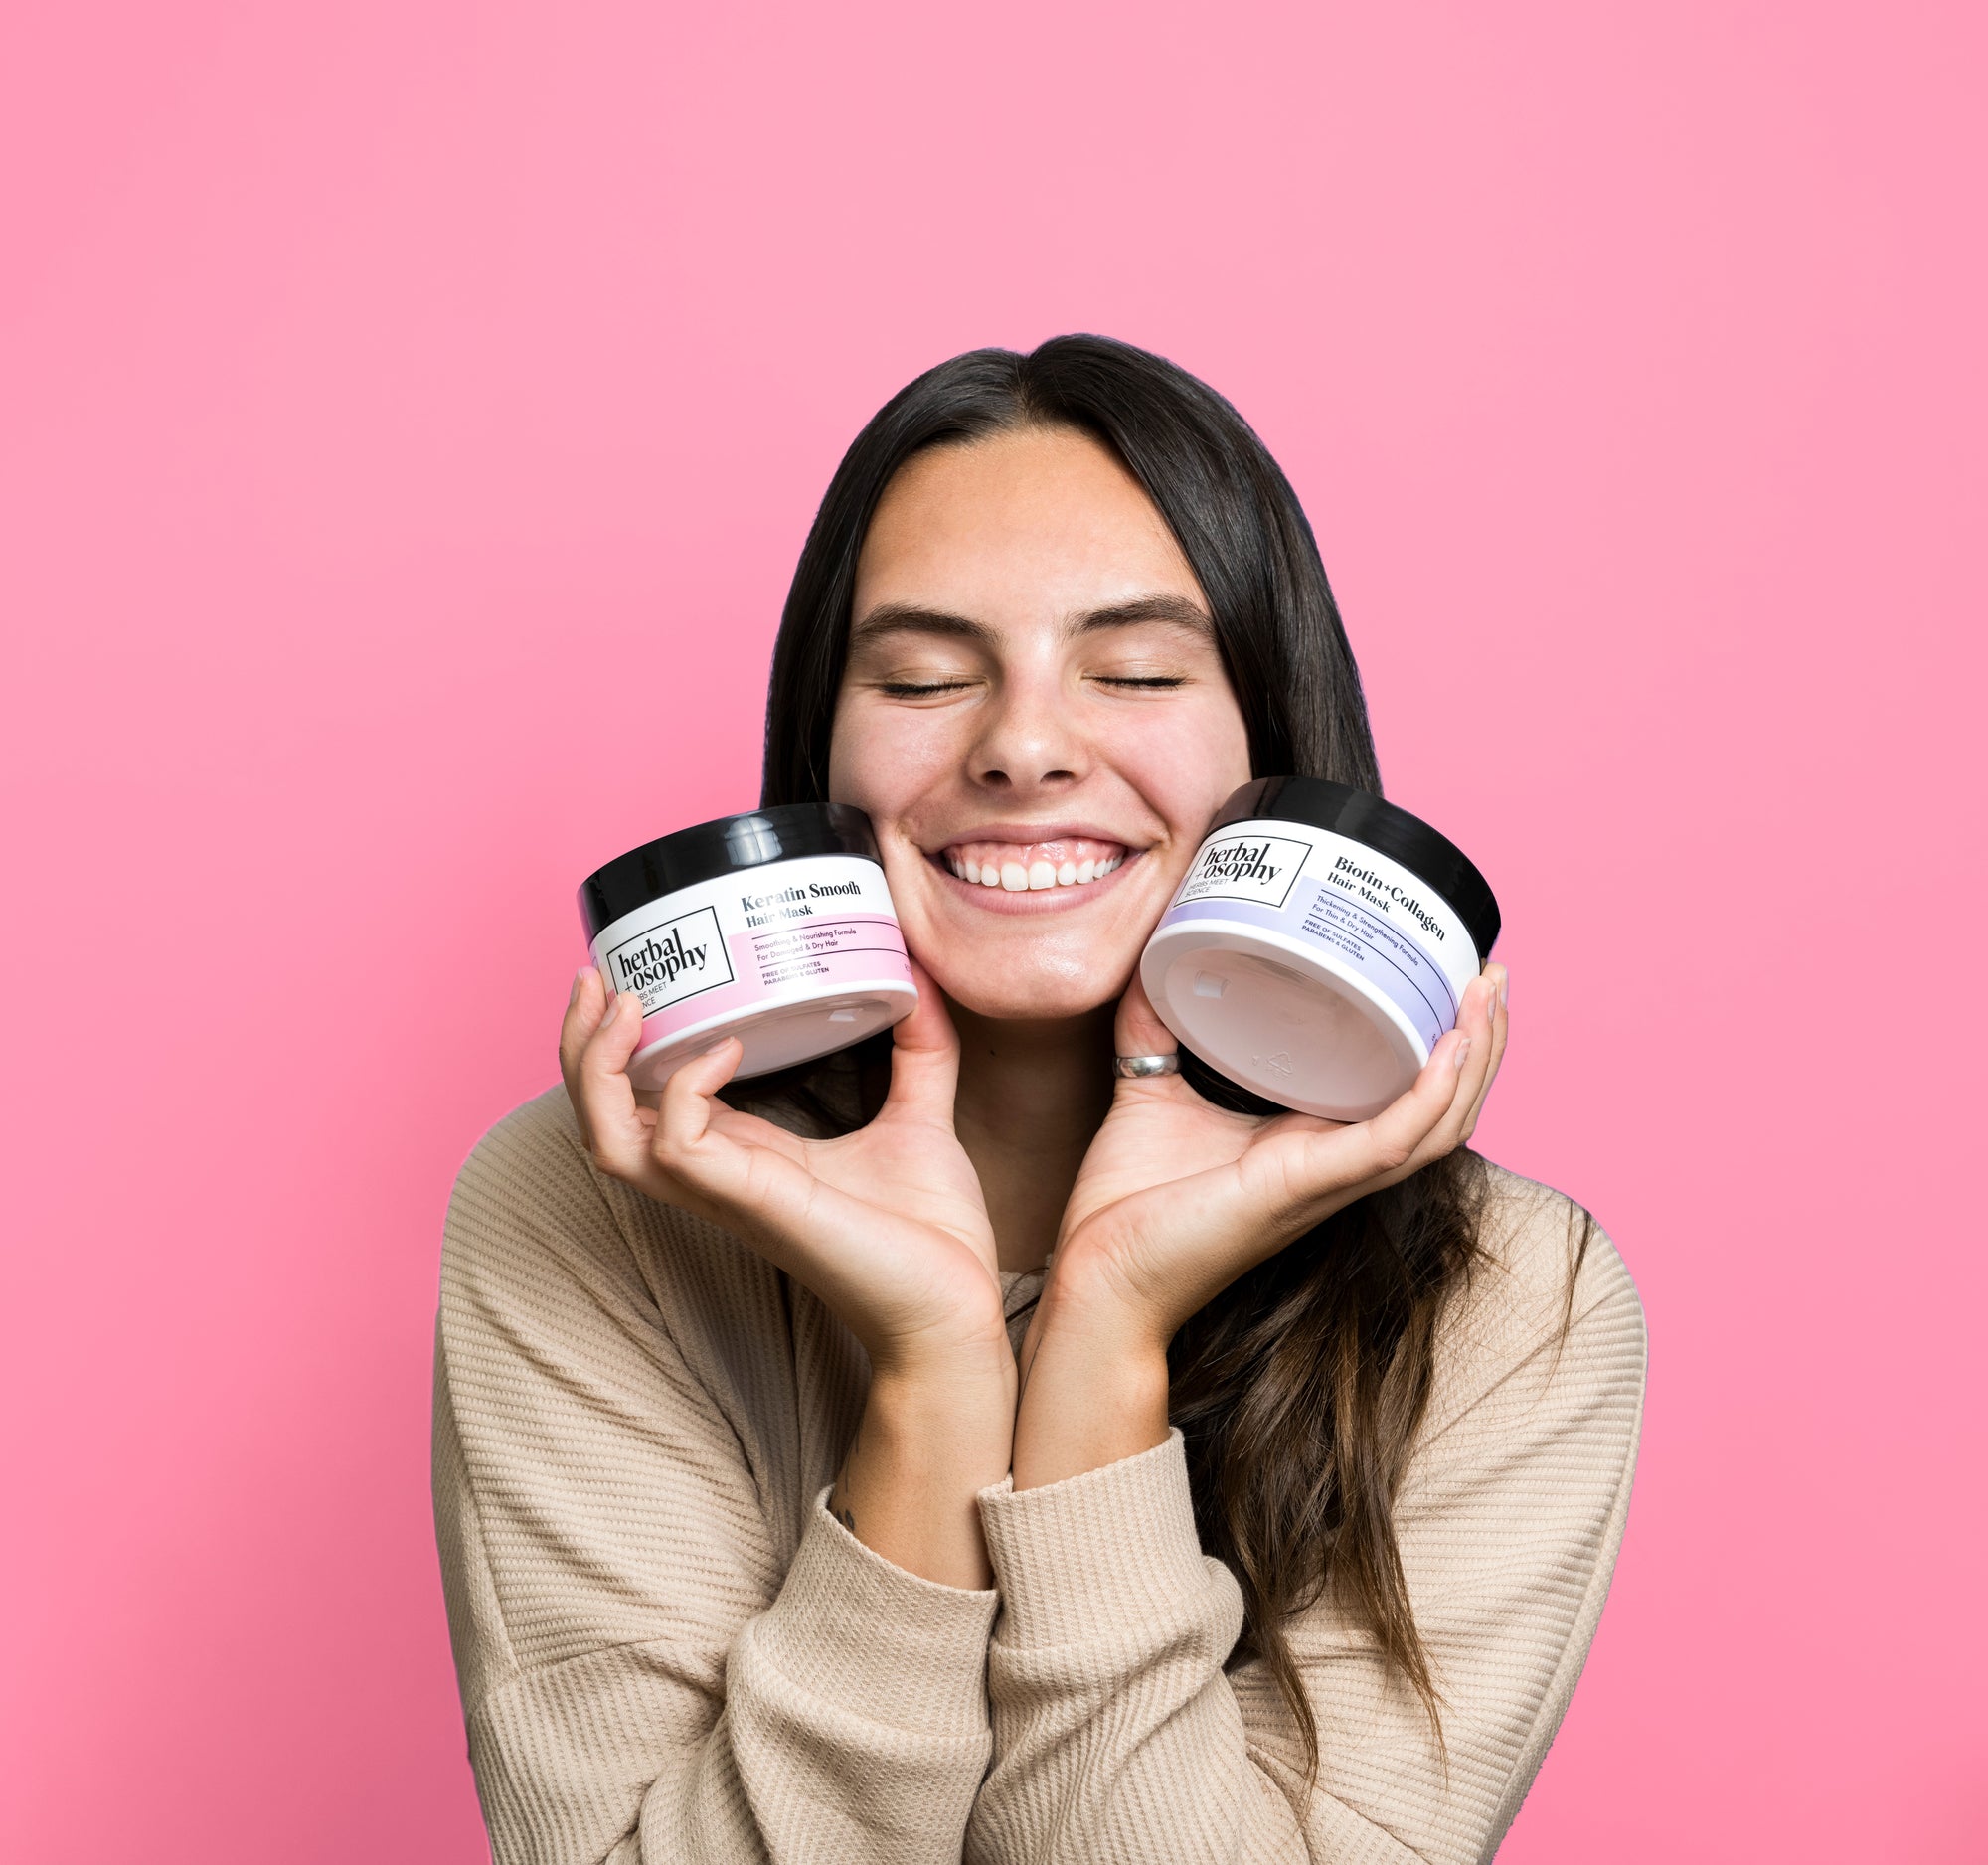 woman with long brown hair smiling holding Herbalosophy hair mask jars to her face